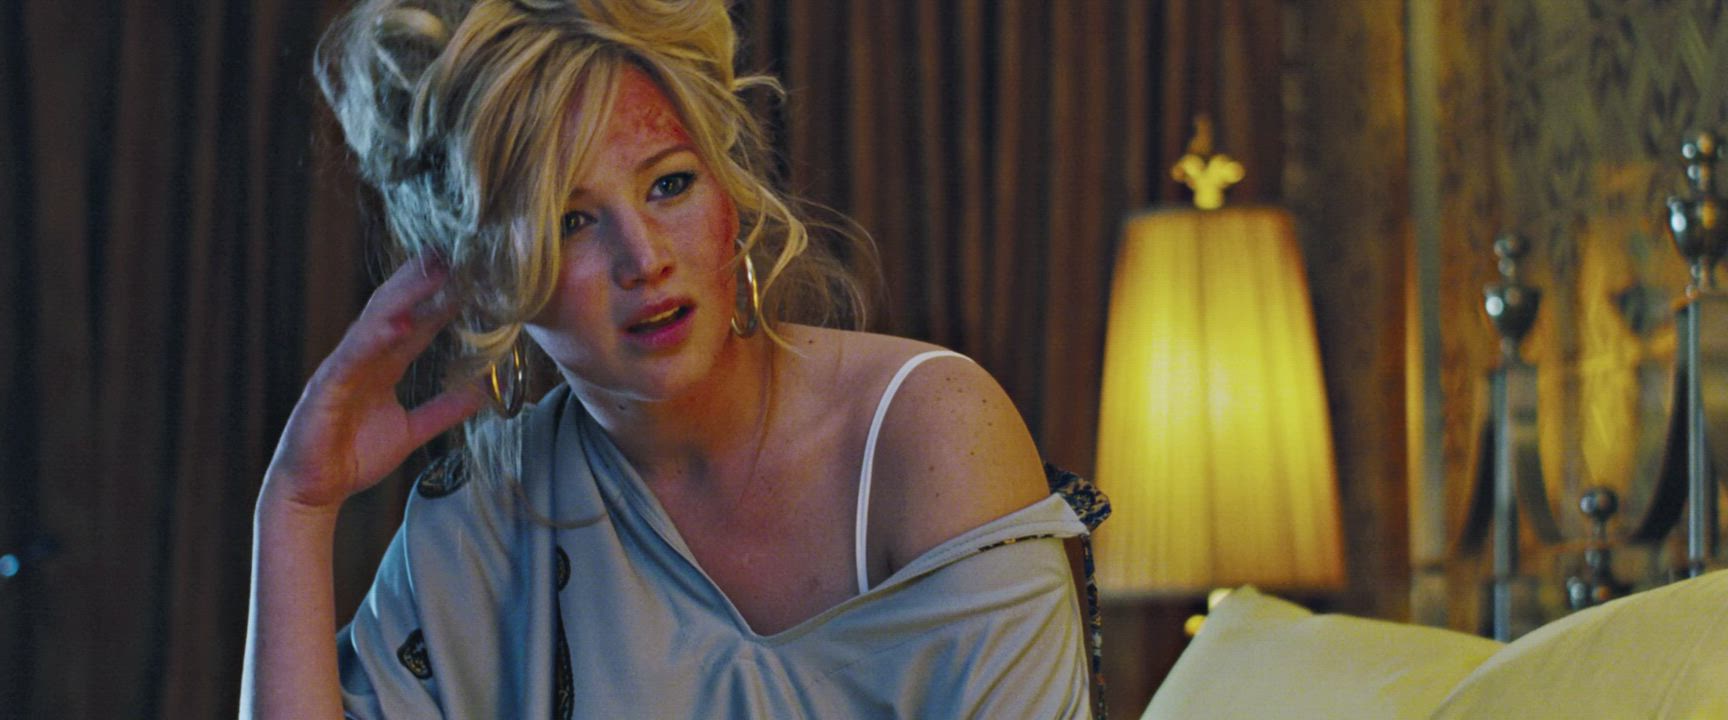 Say I'm Your Number One: Jennifer Lawrence in American Hustle (2013)